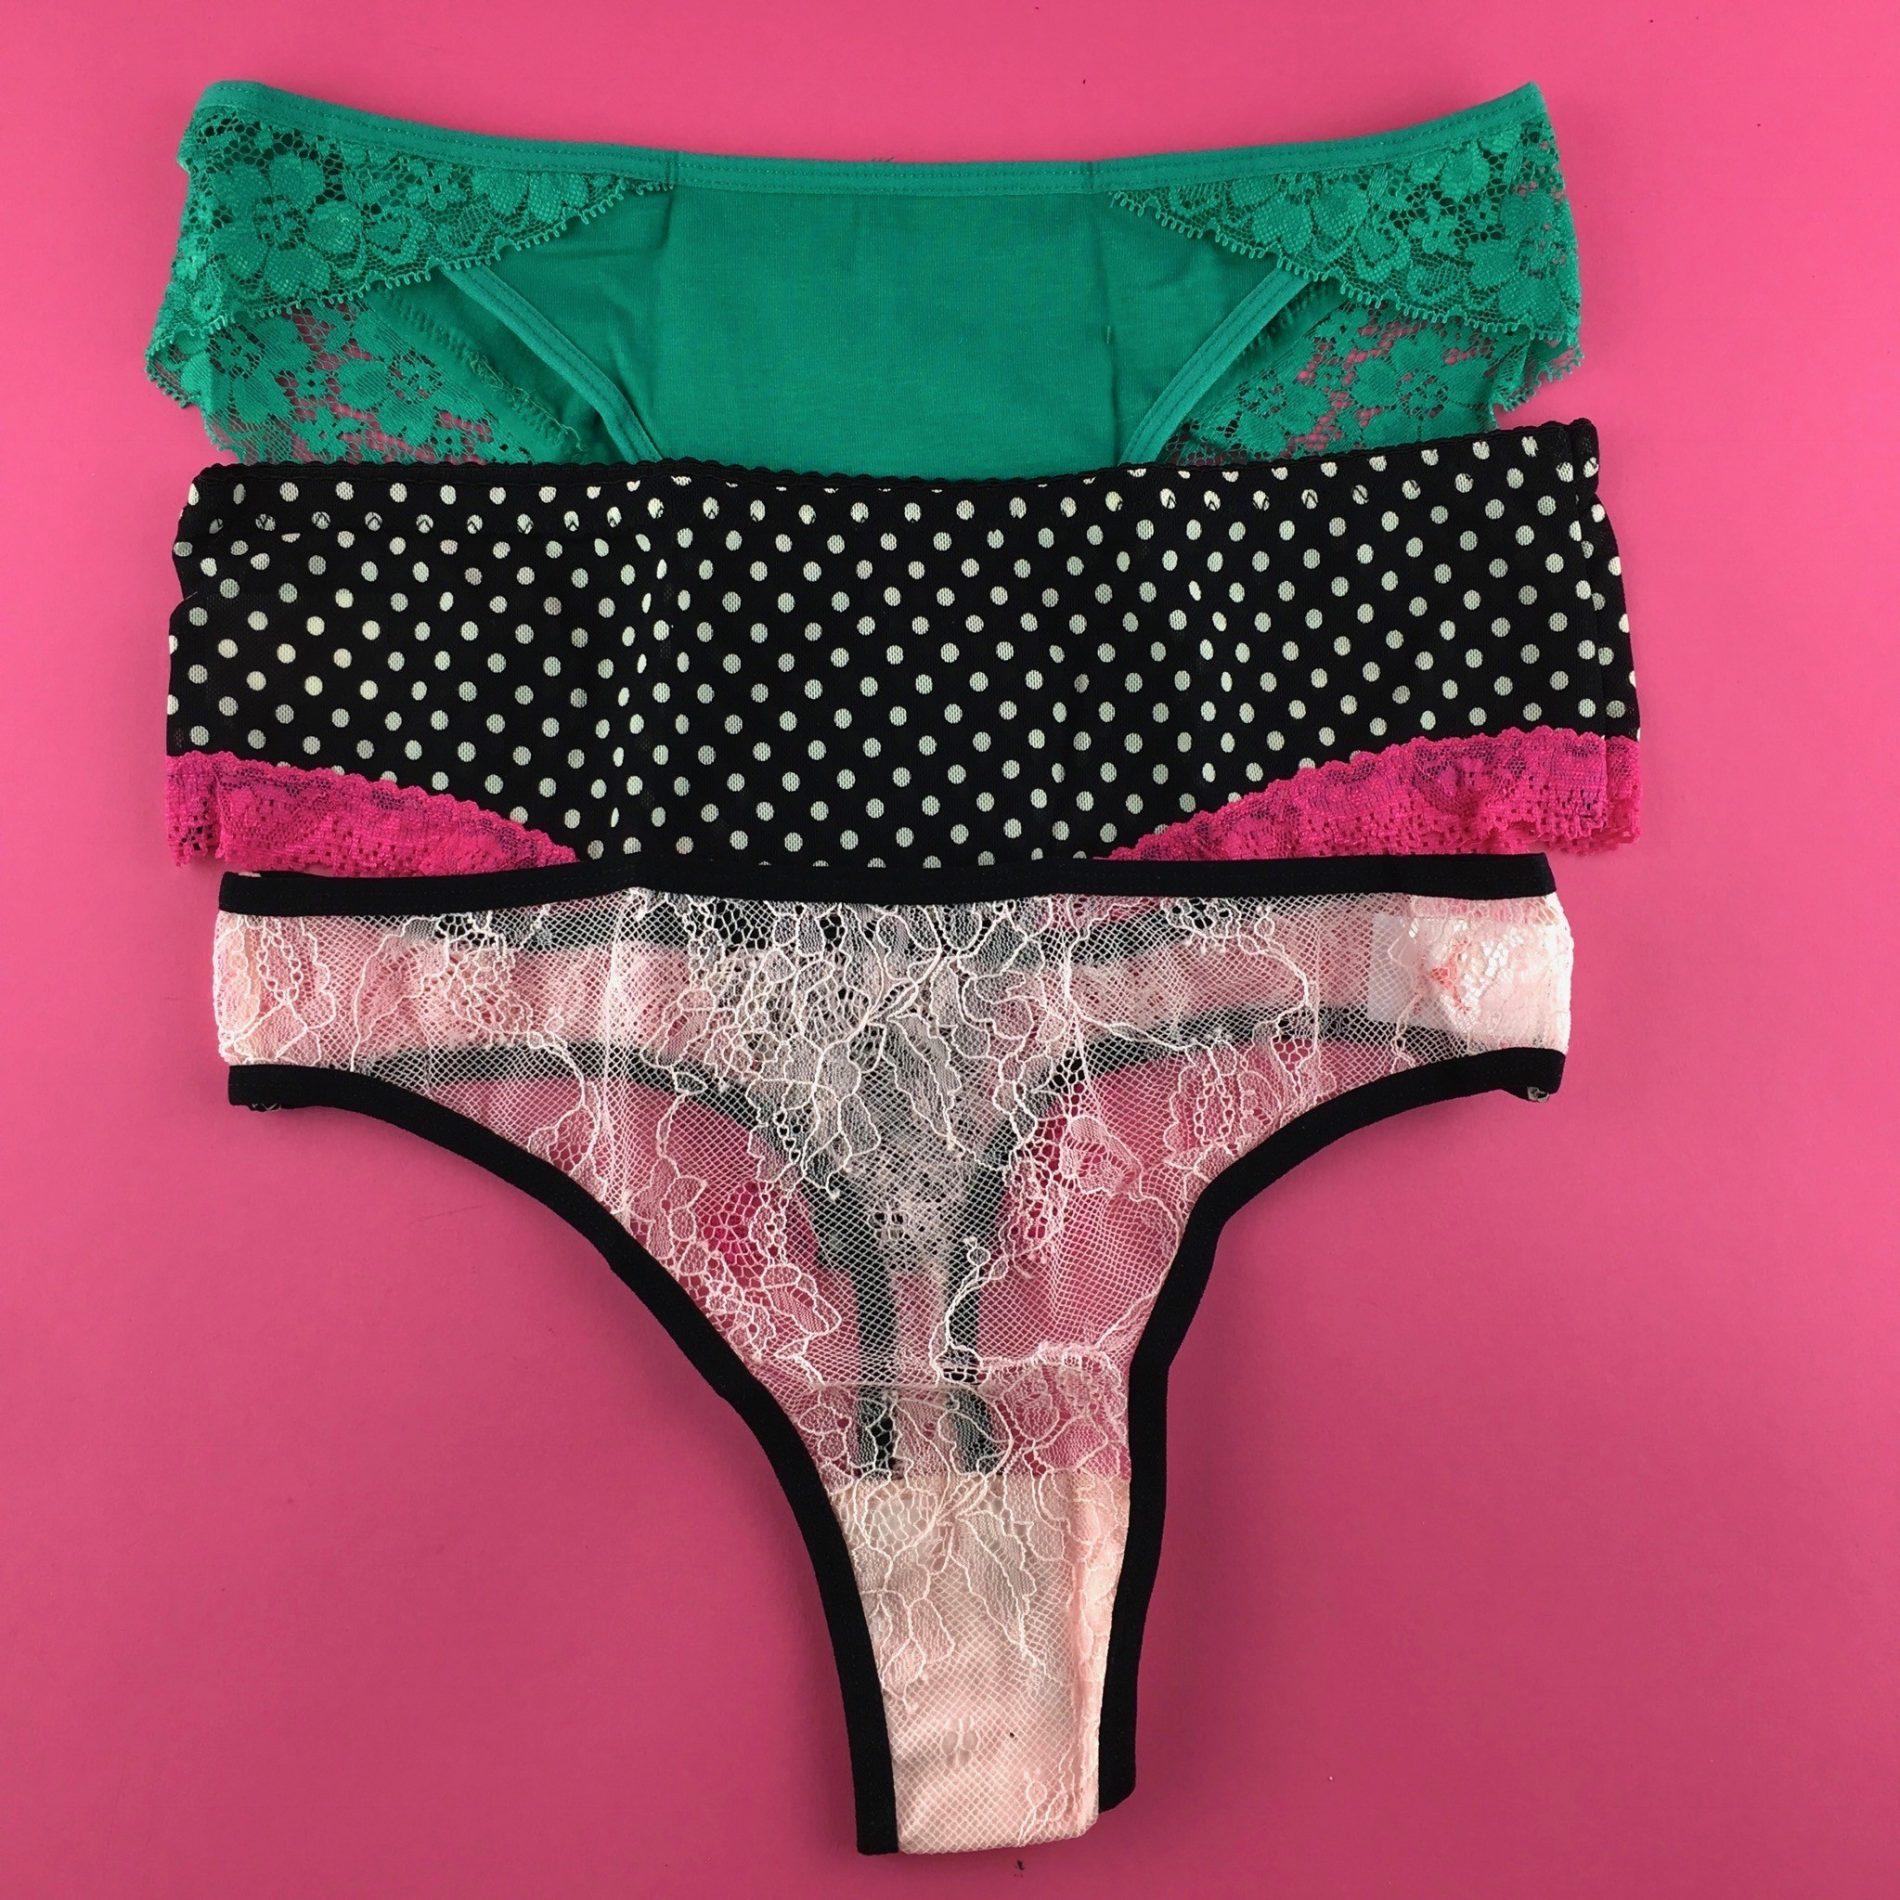 Knotty Knickers Subscription Review – February 2018